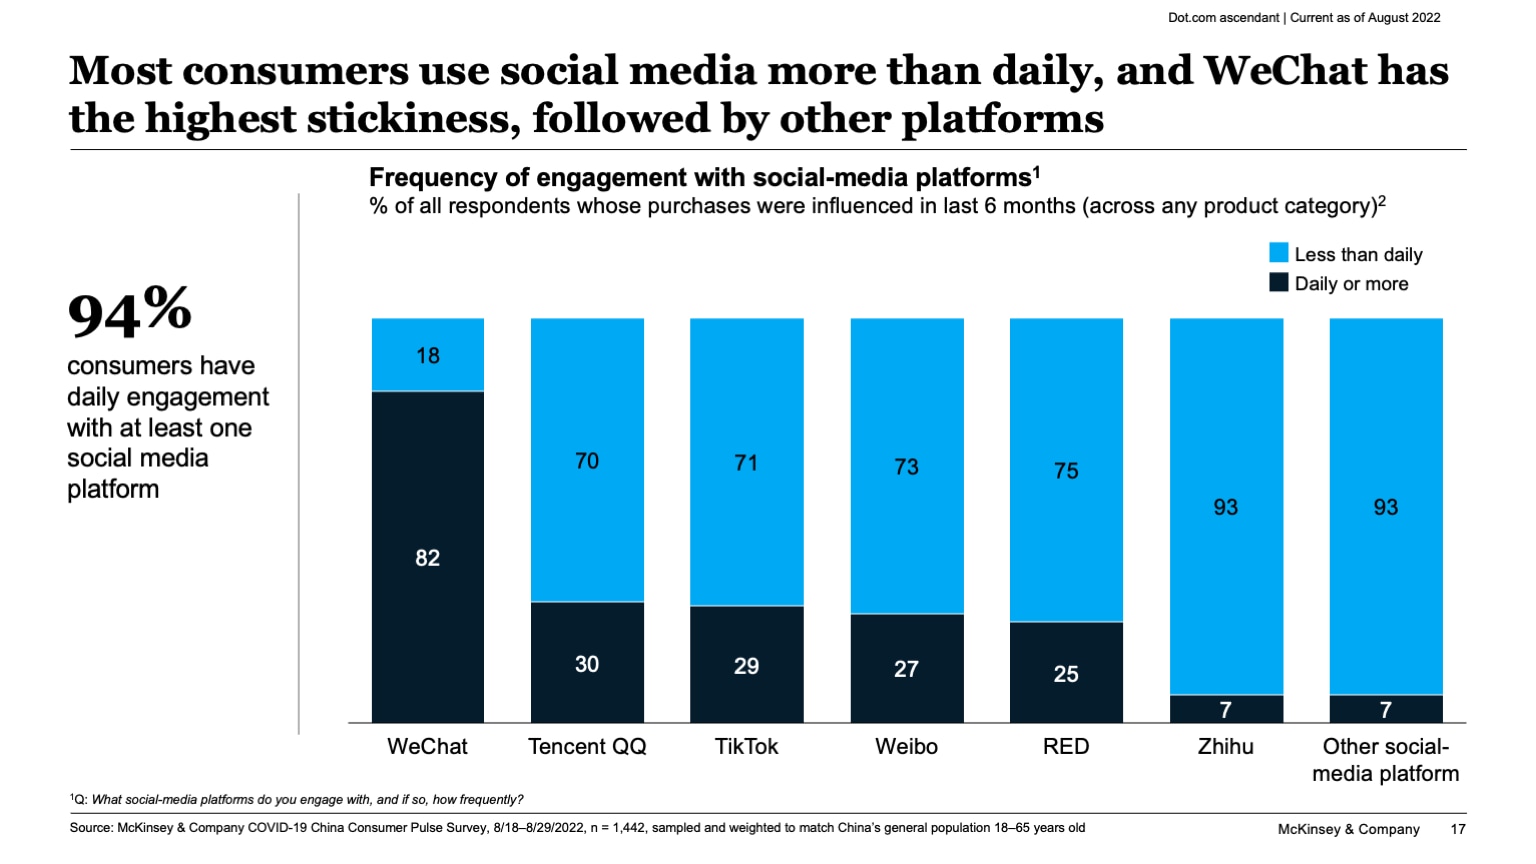 Most consumers use social media more than daily, and WeChat has the highest stickiness, followed by other platforms